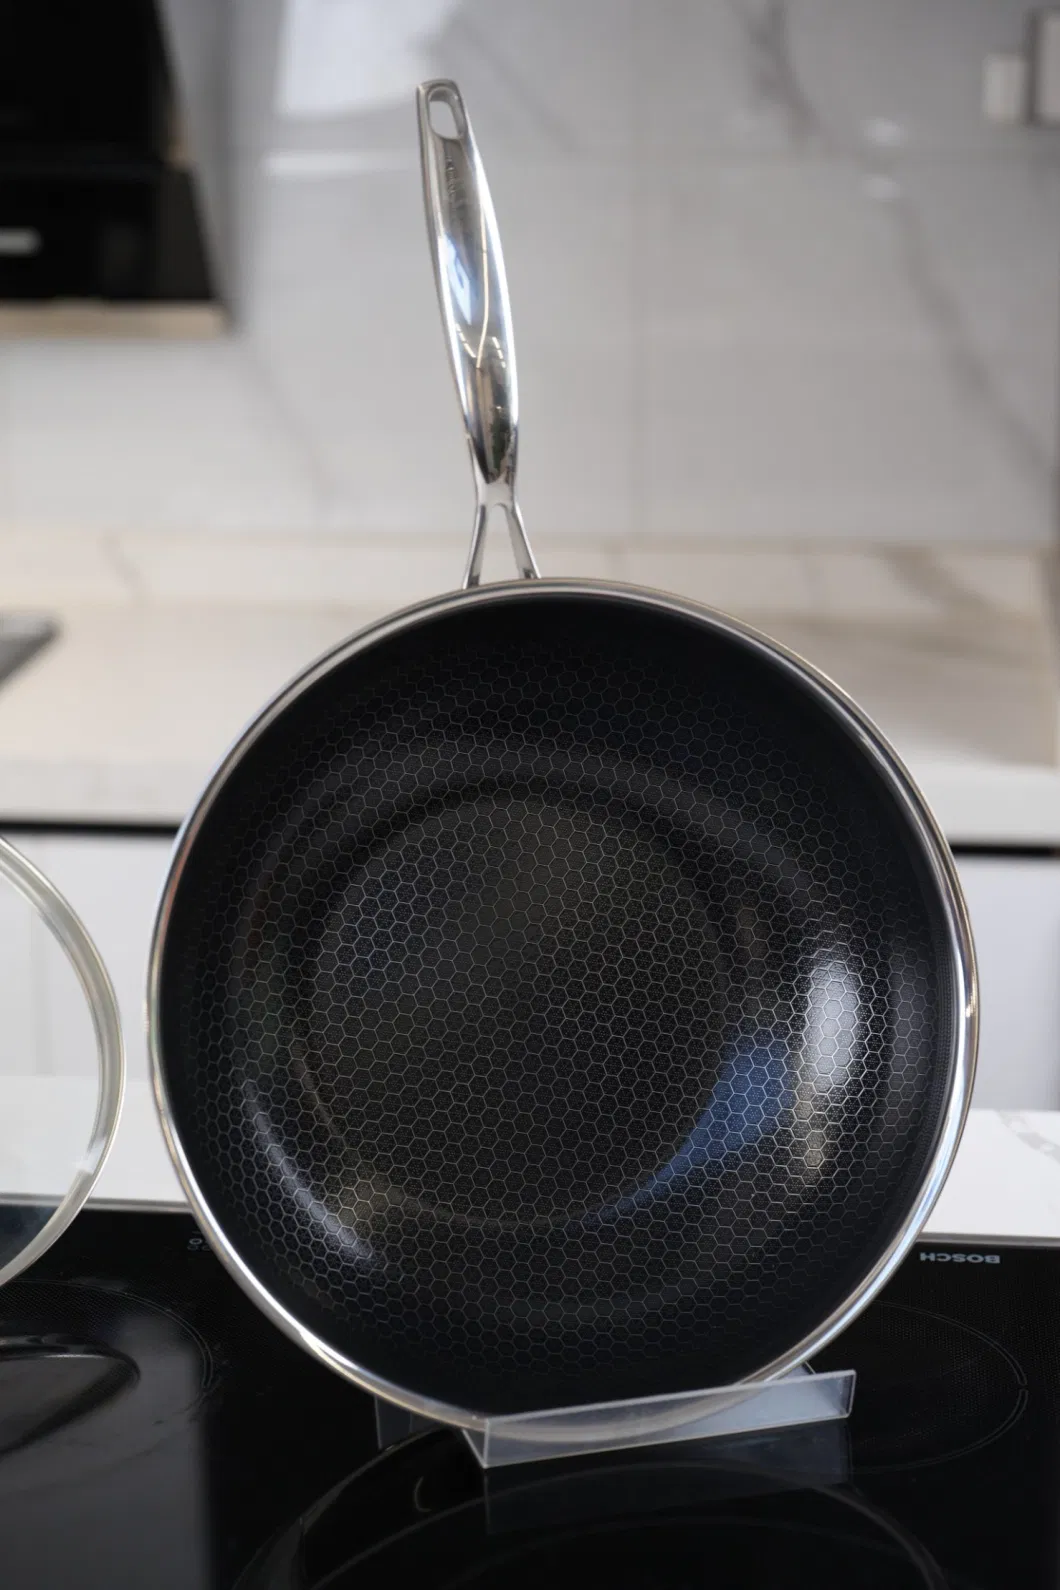 New Arrival 30cm Tri-Ply Stainless Steel Non-Stick Honey Comb Wok with Ceramic Paint Coating Pfoa&Pfas Free Cookware